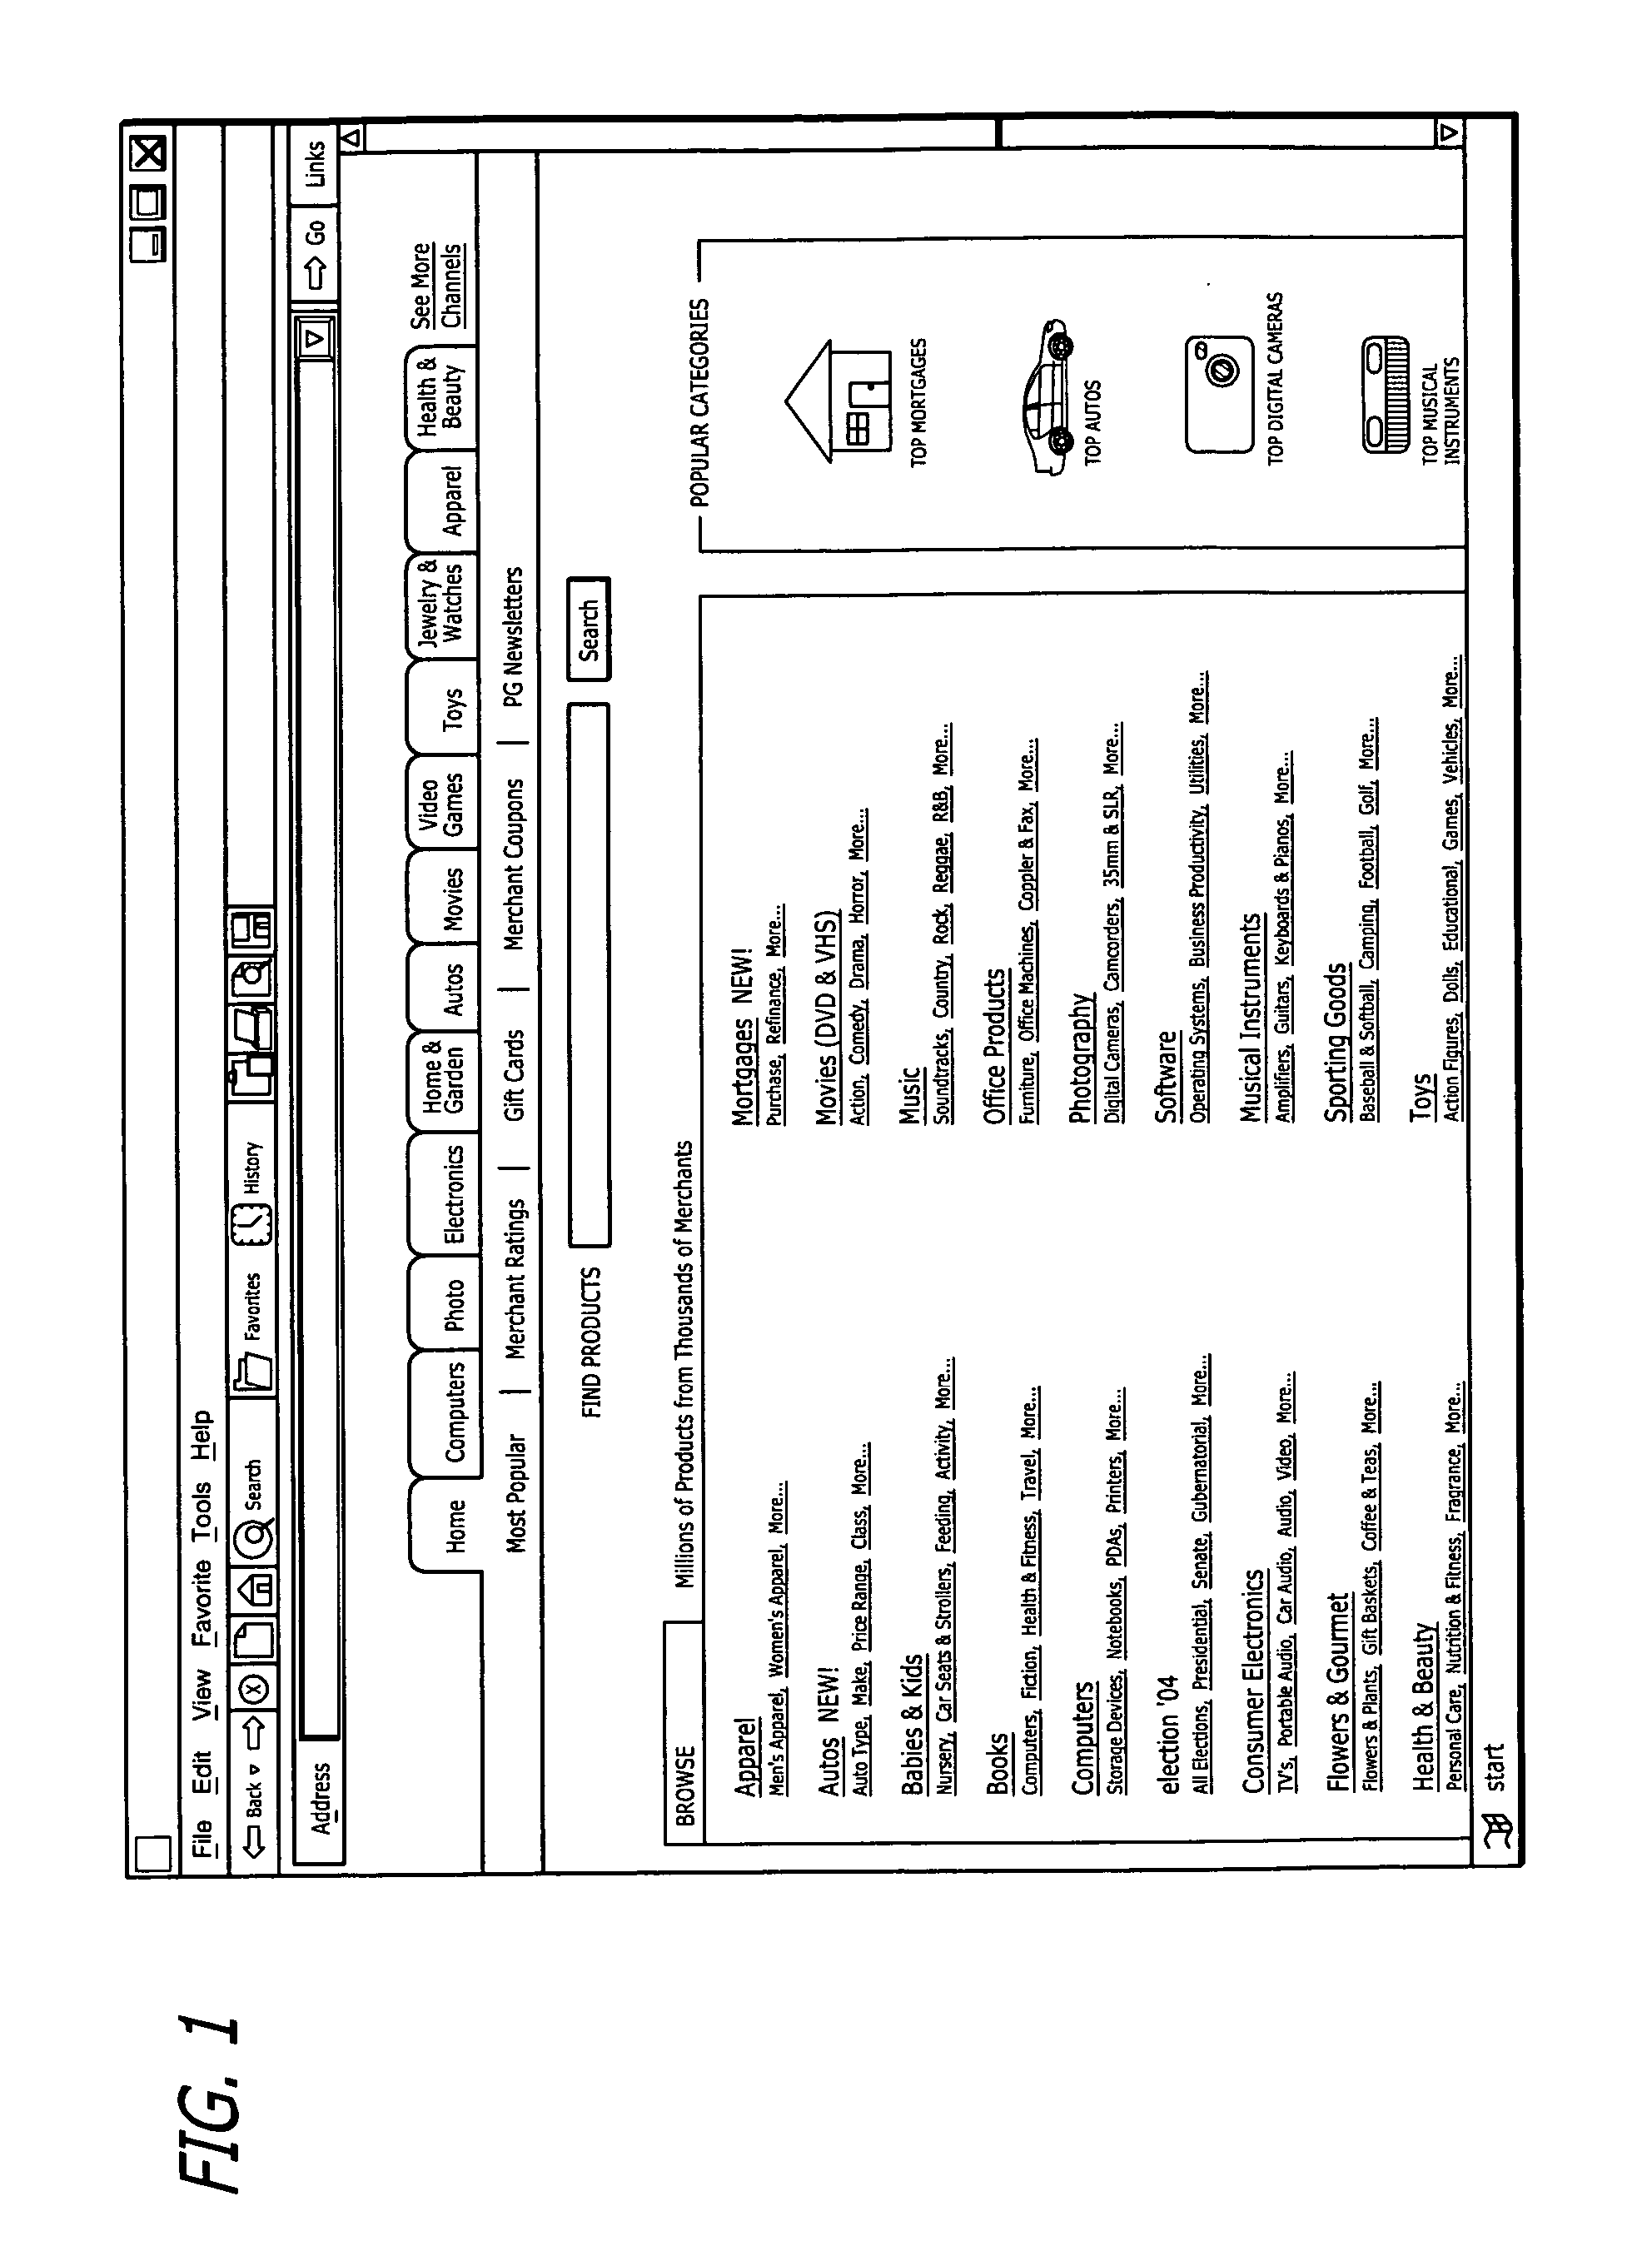 System and method for determining optimal sourcing for aggregate goods and services